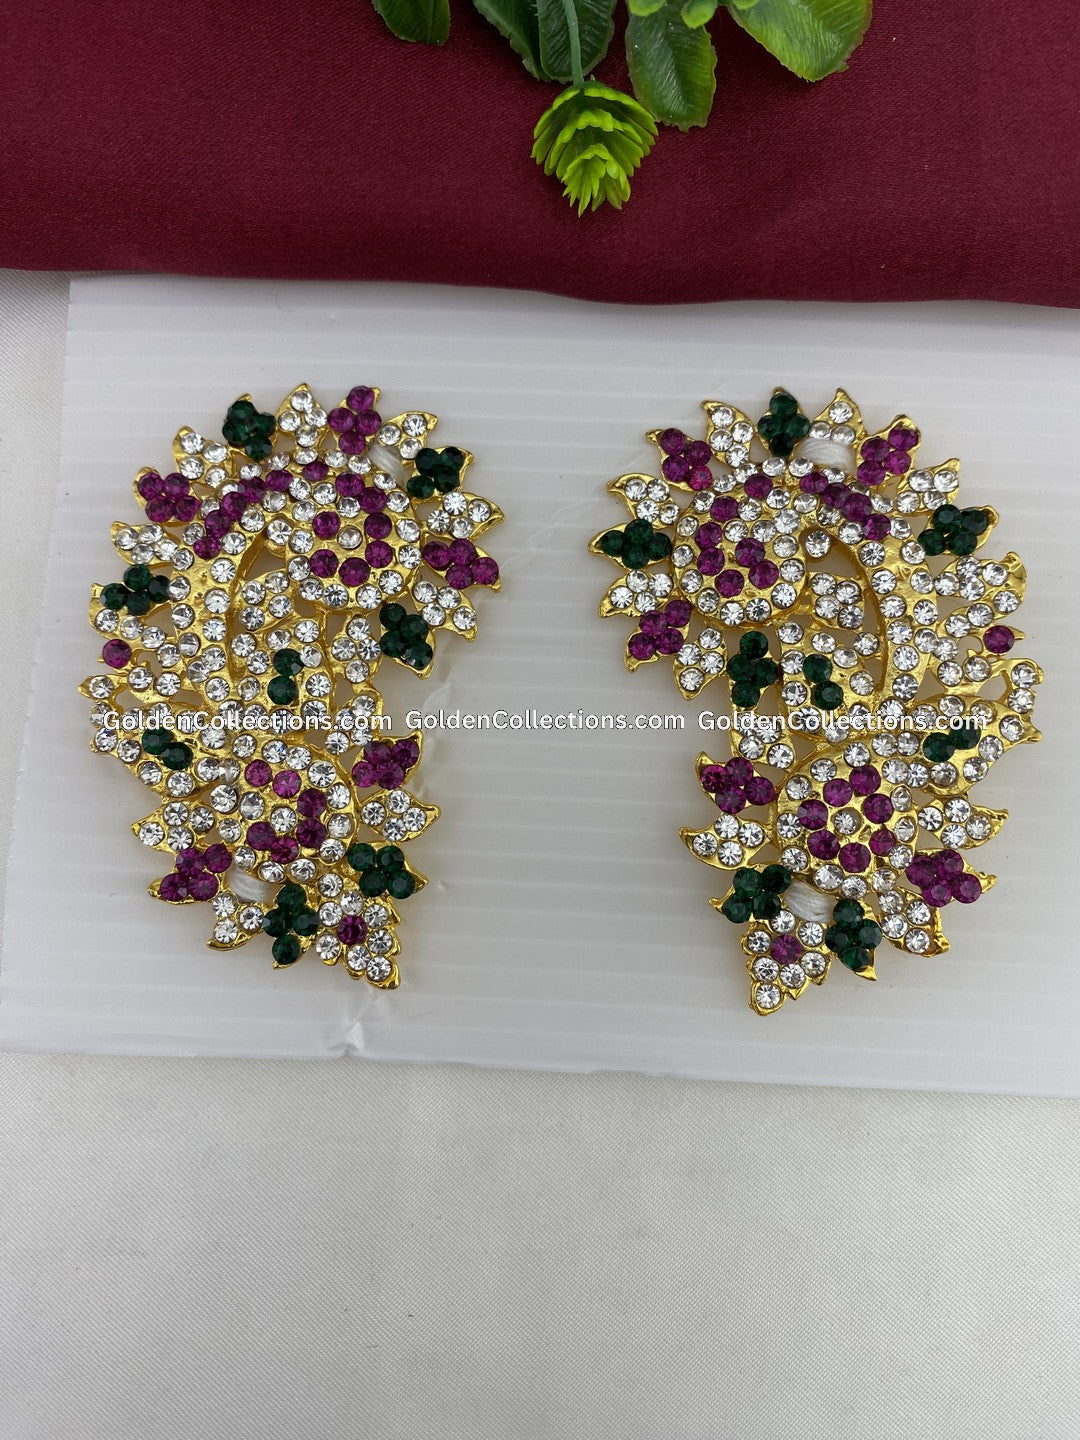 Temple Karna Pathakam Earrings - Divine Jewels - GoldenCollections DGE-058